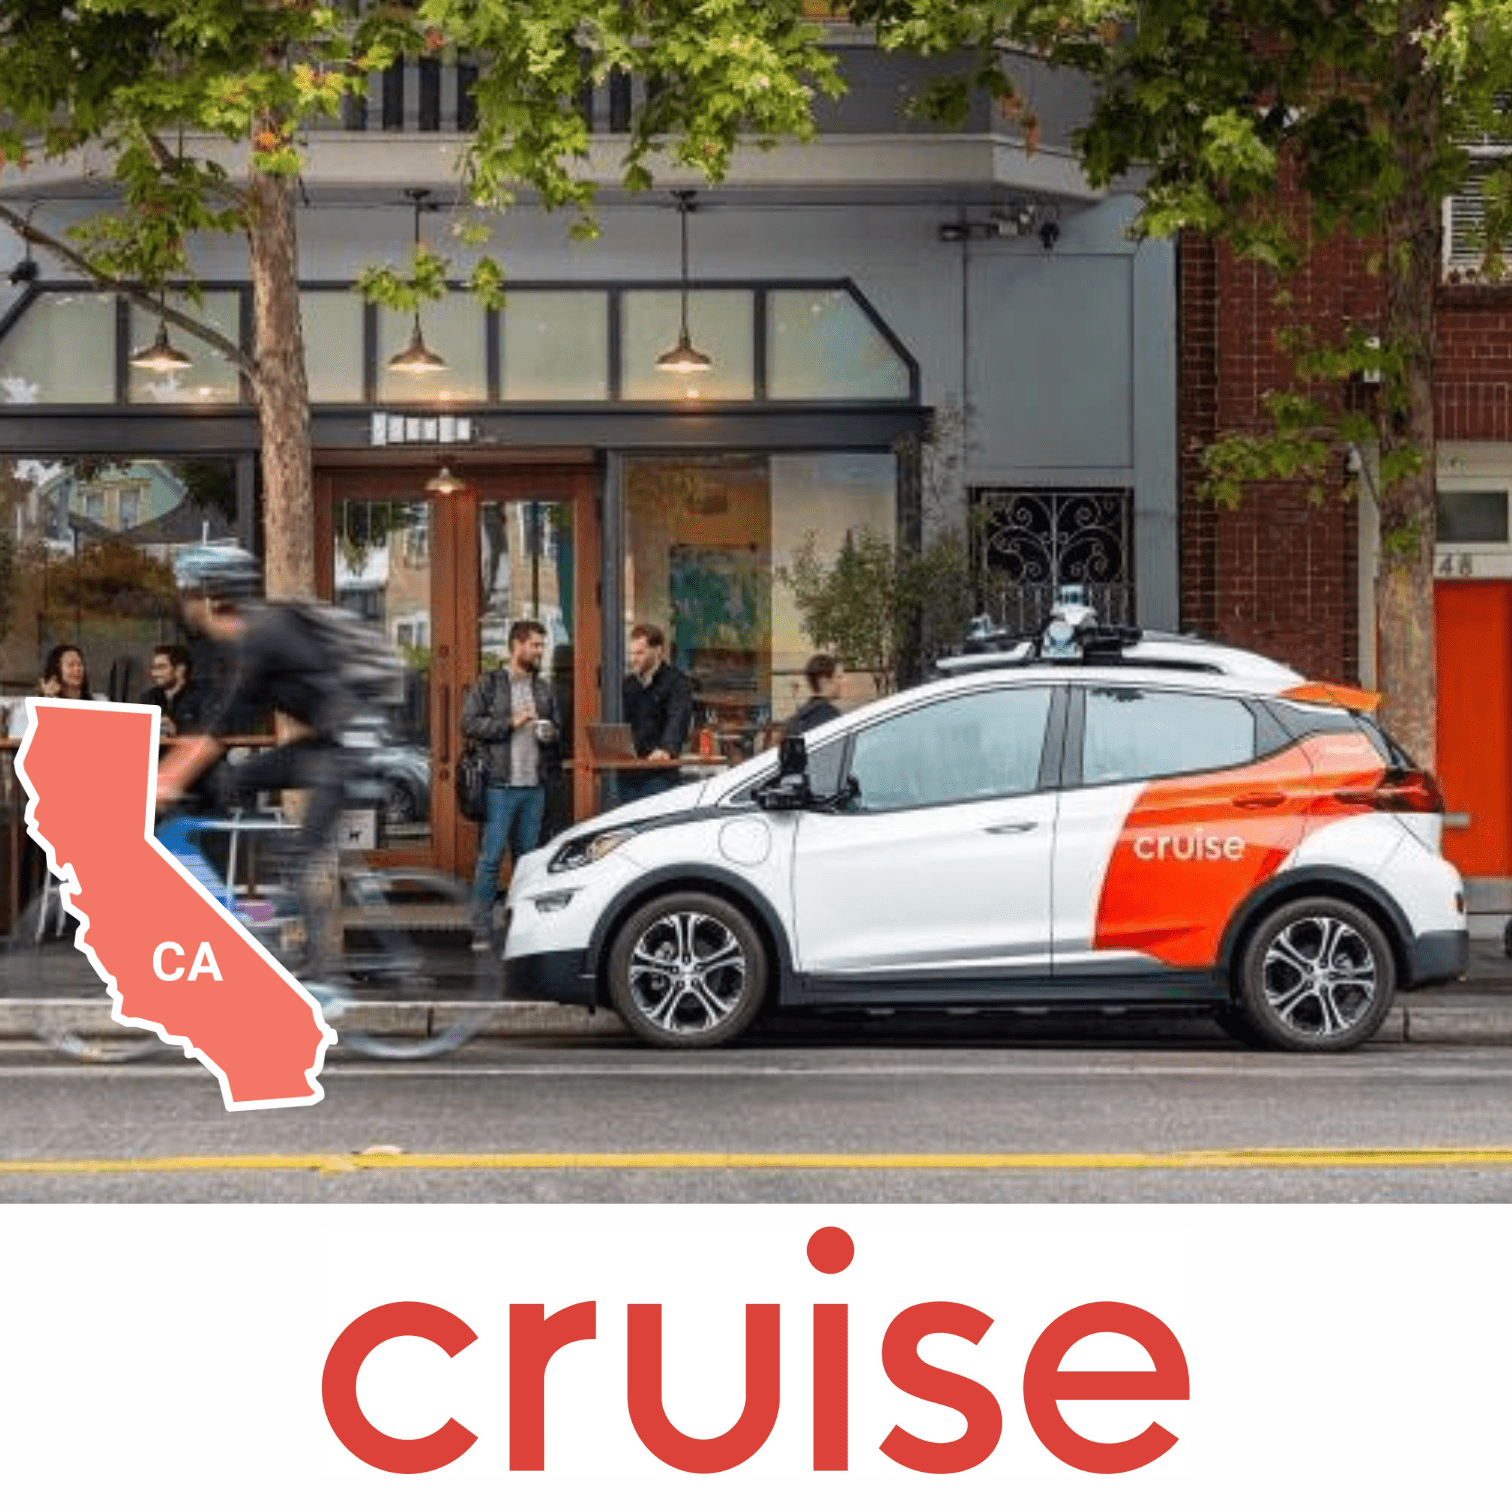 A self-driving Cruise car in Hayes Valley